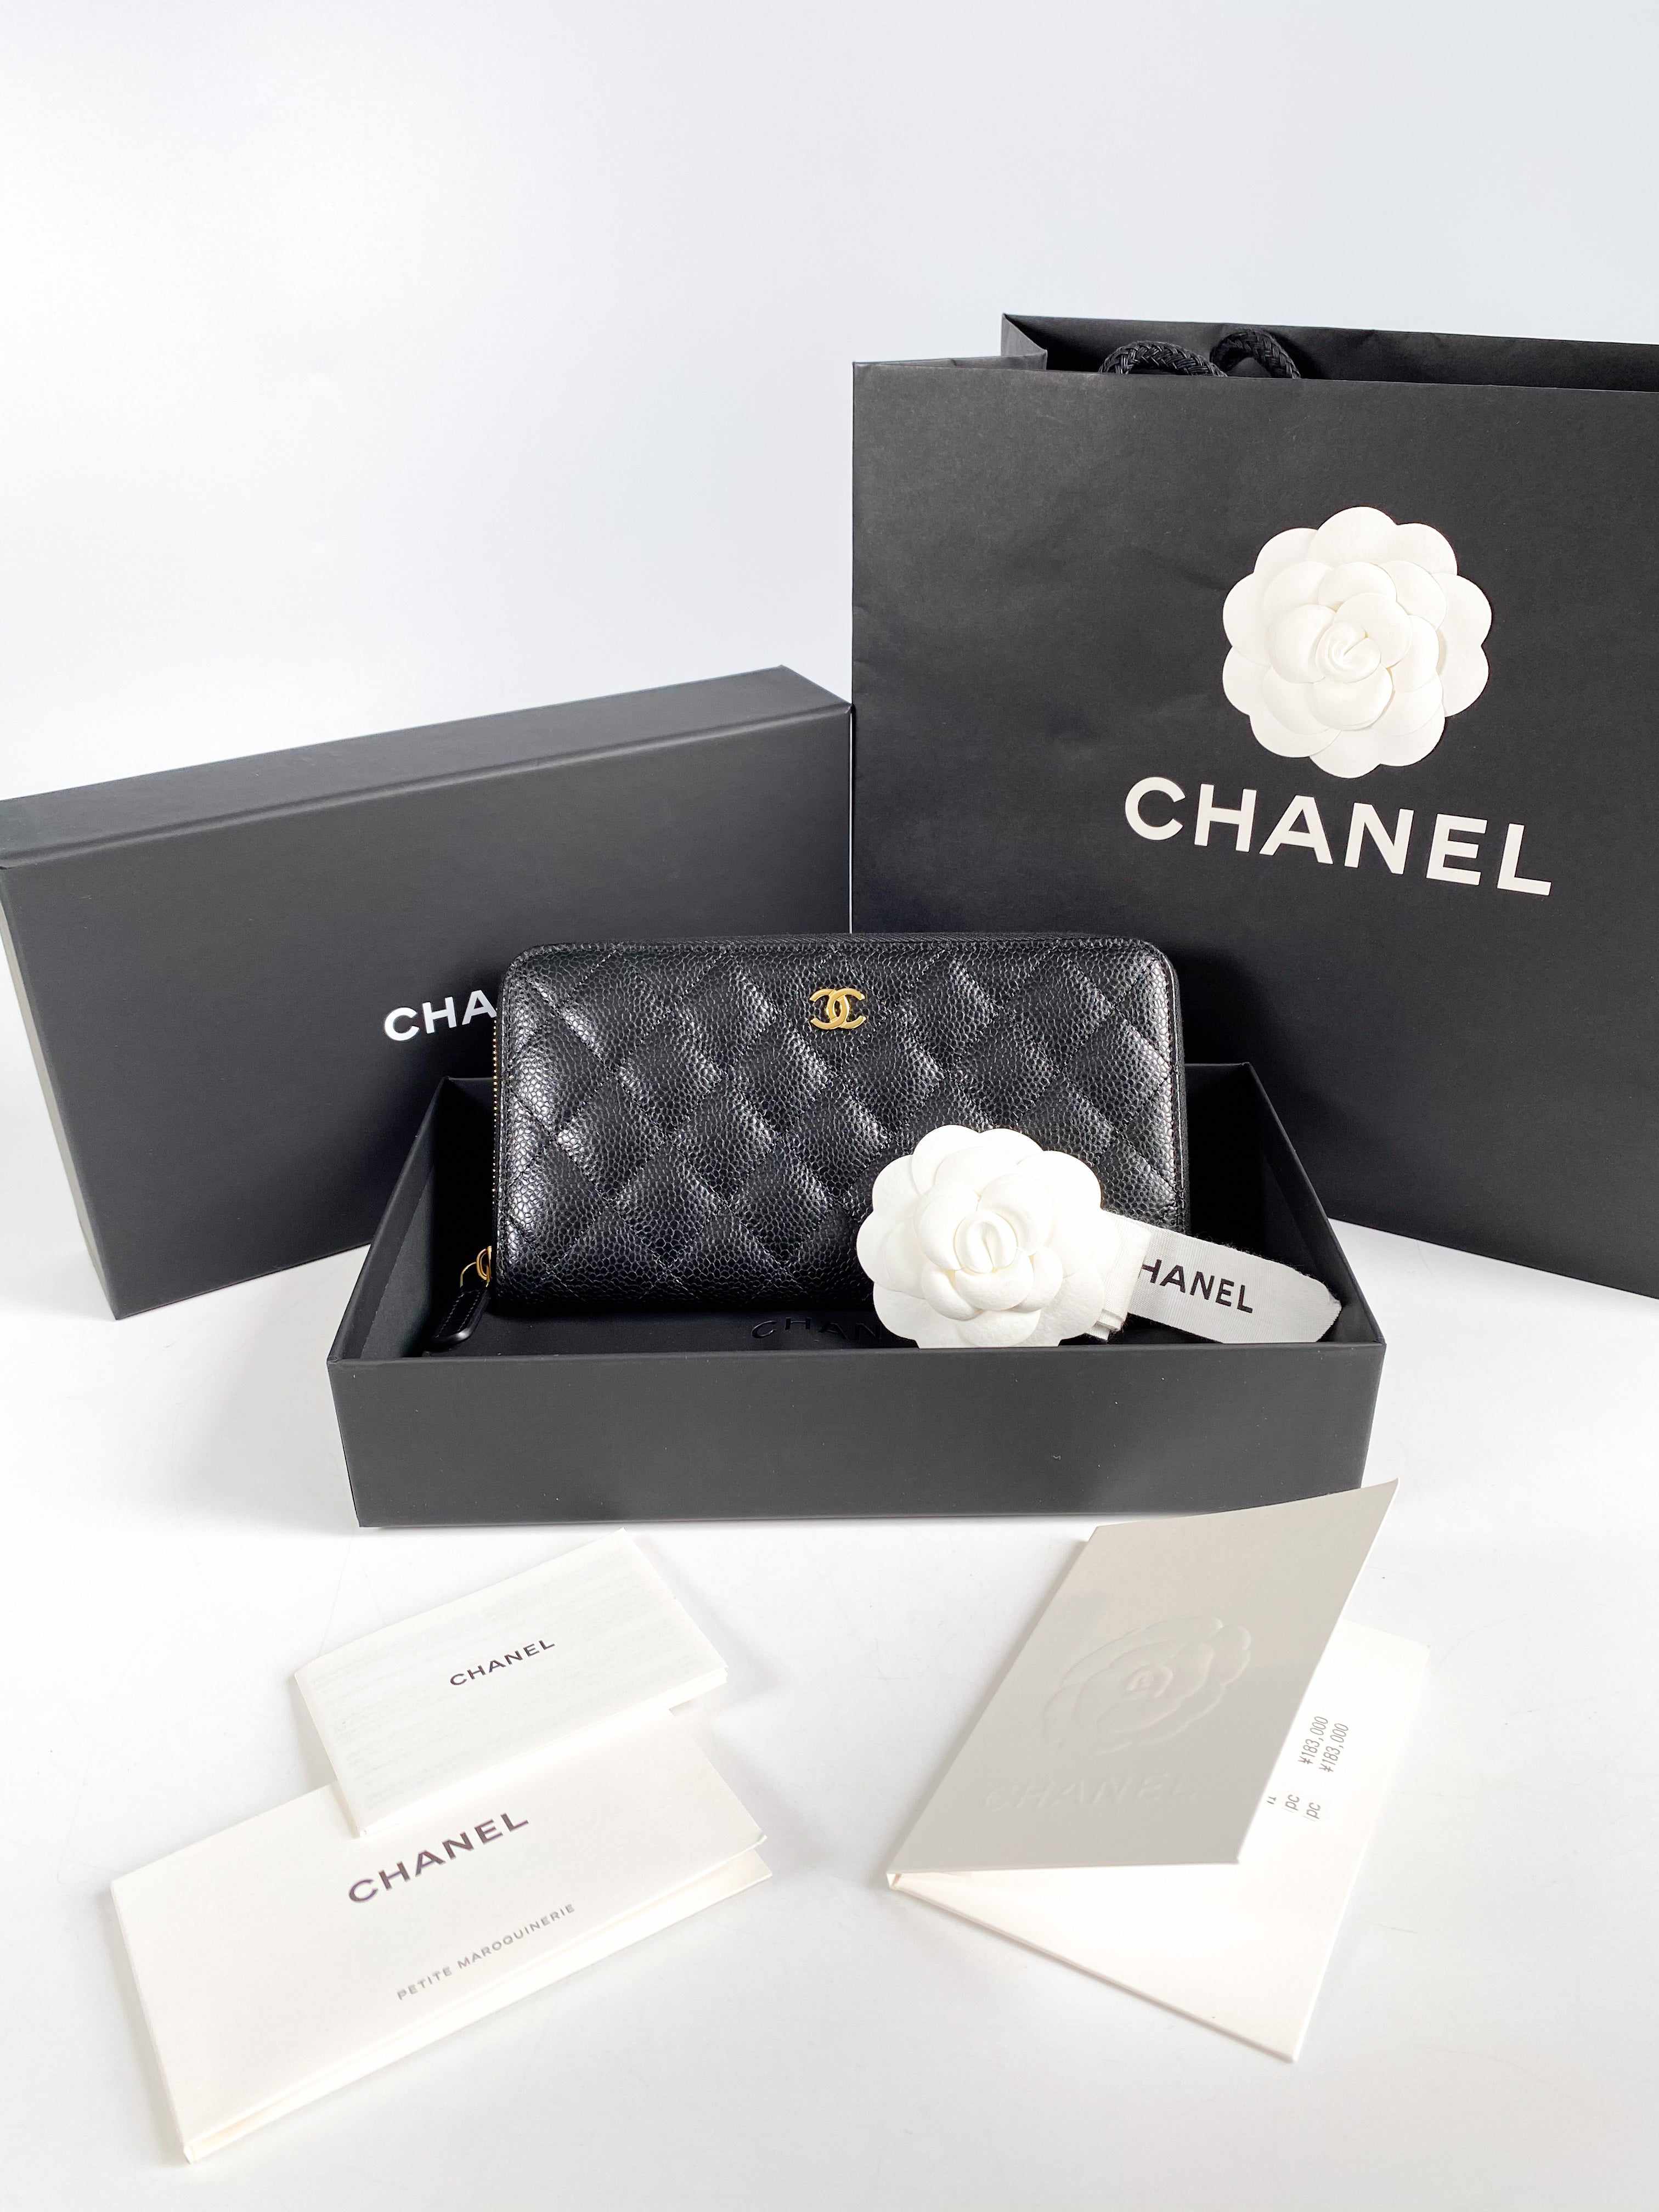 Chanel Classic Long Zipped Wallet Black Caviar Leather & Gold Hardware (Microchip)